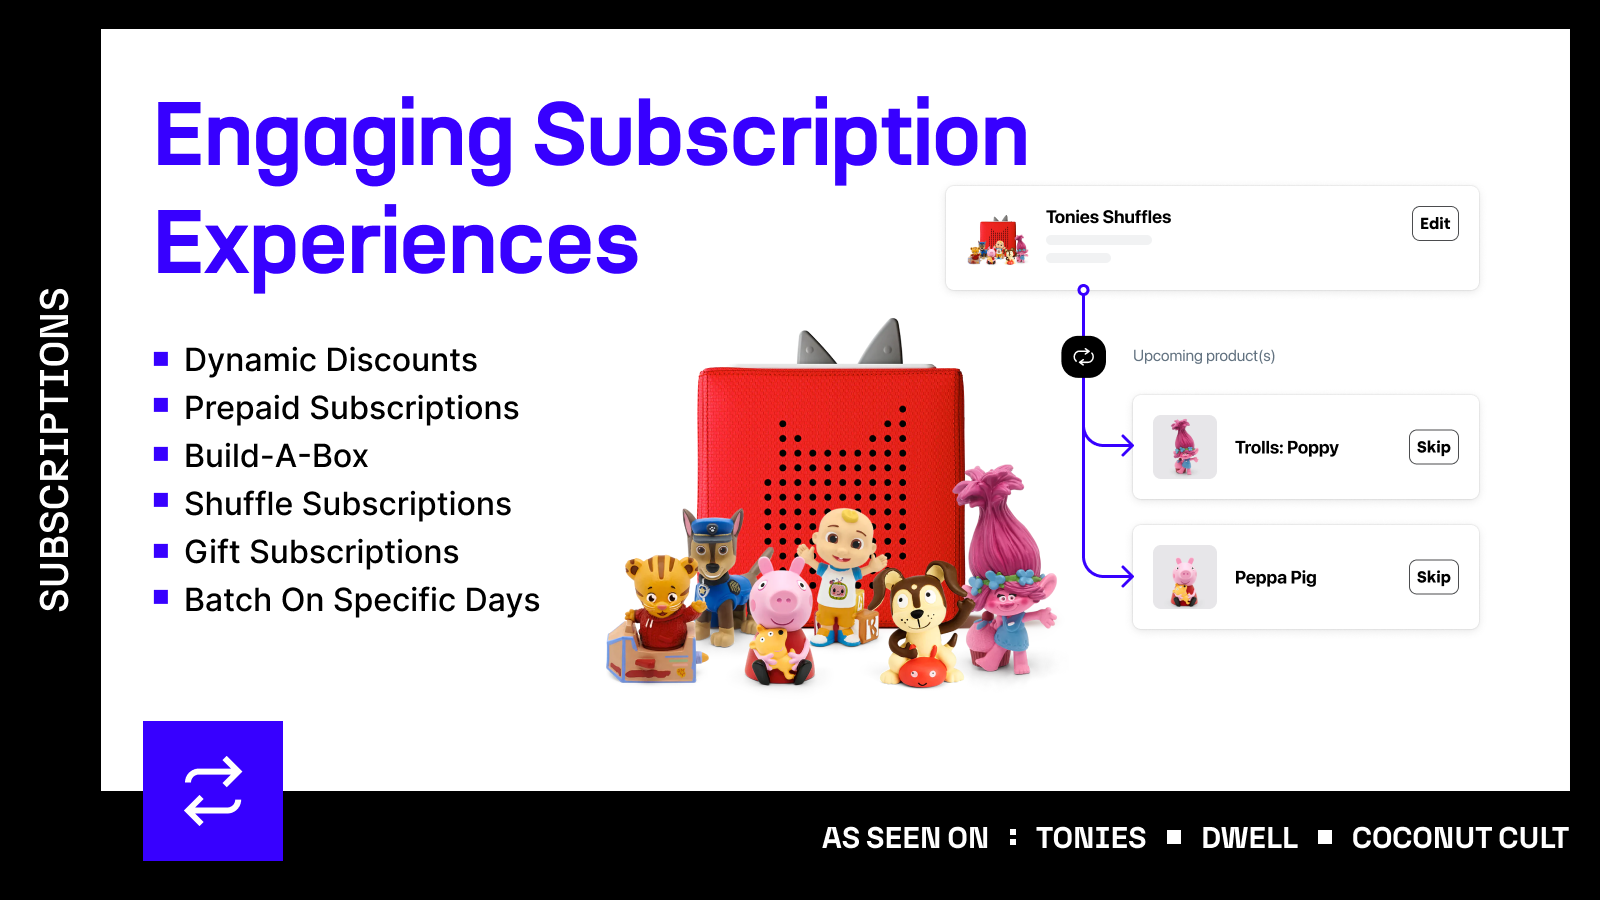 Engaging Subscription Experiences